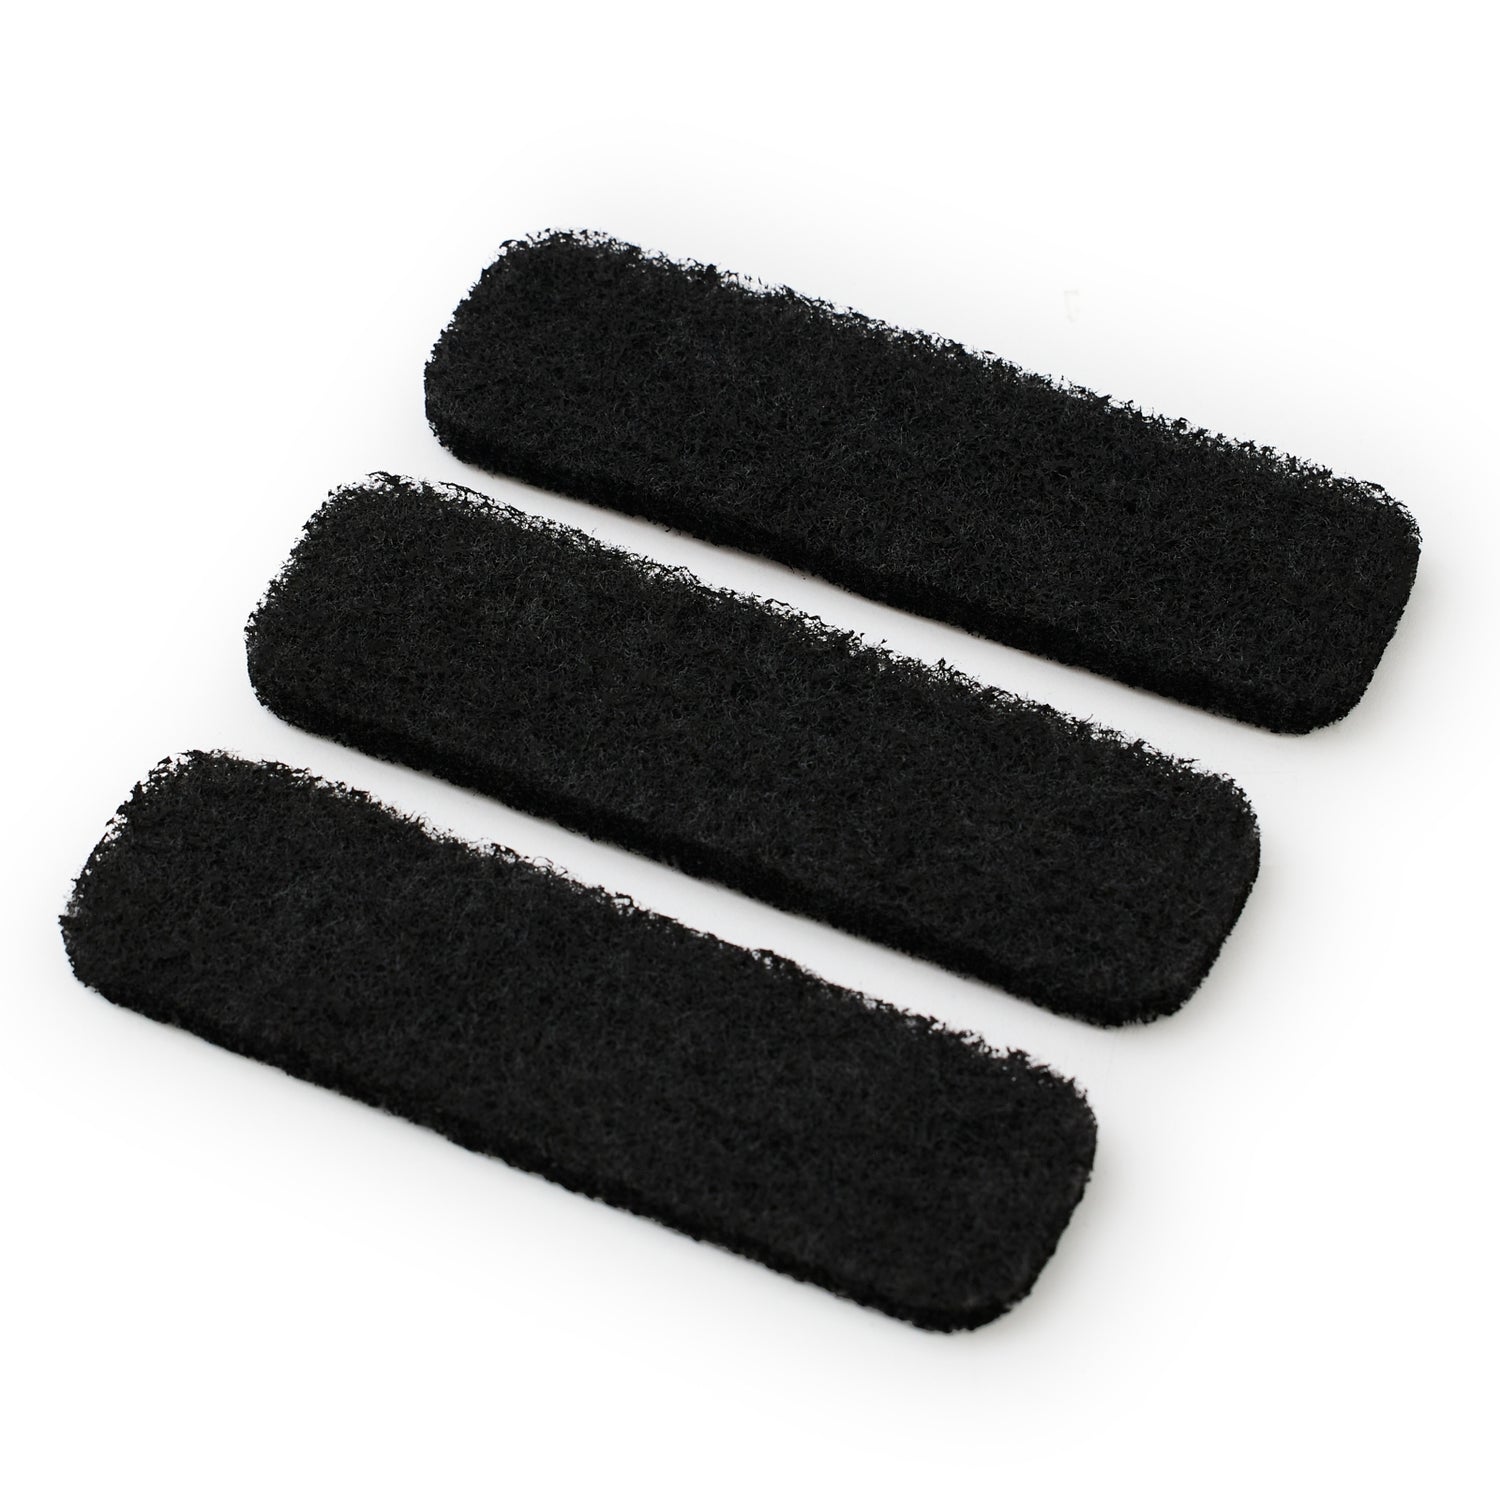 BIALA set of 3 activated carbon filters